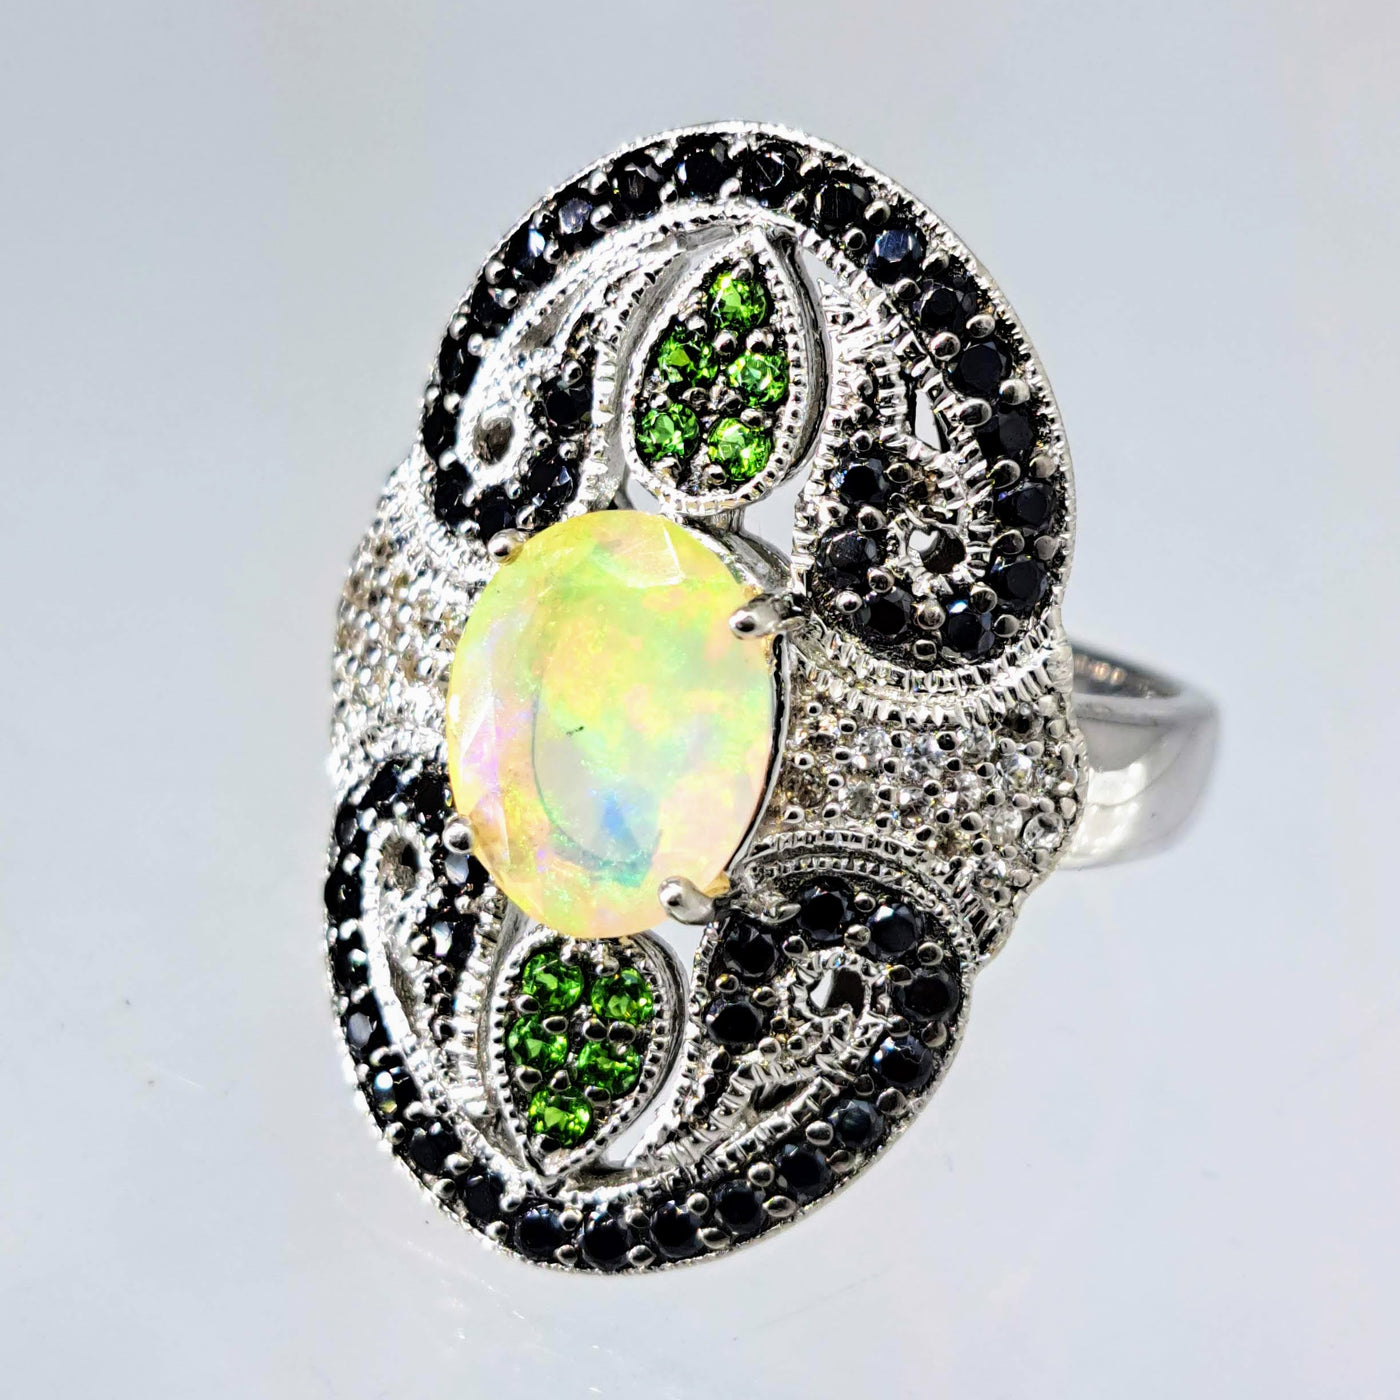 "Queen Opal's Art Deco Revival" Sz 8 Ring - Opal, Sapphire, Chrome Diopside, Anti-tarnish Sterling